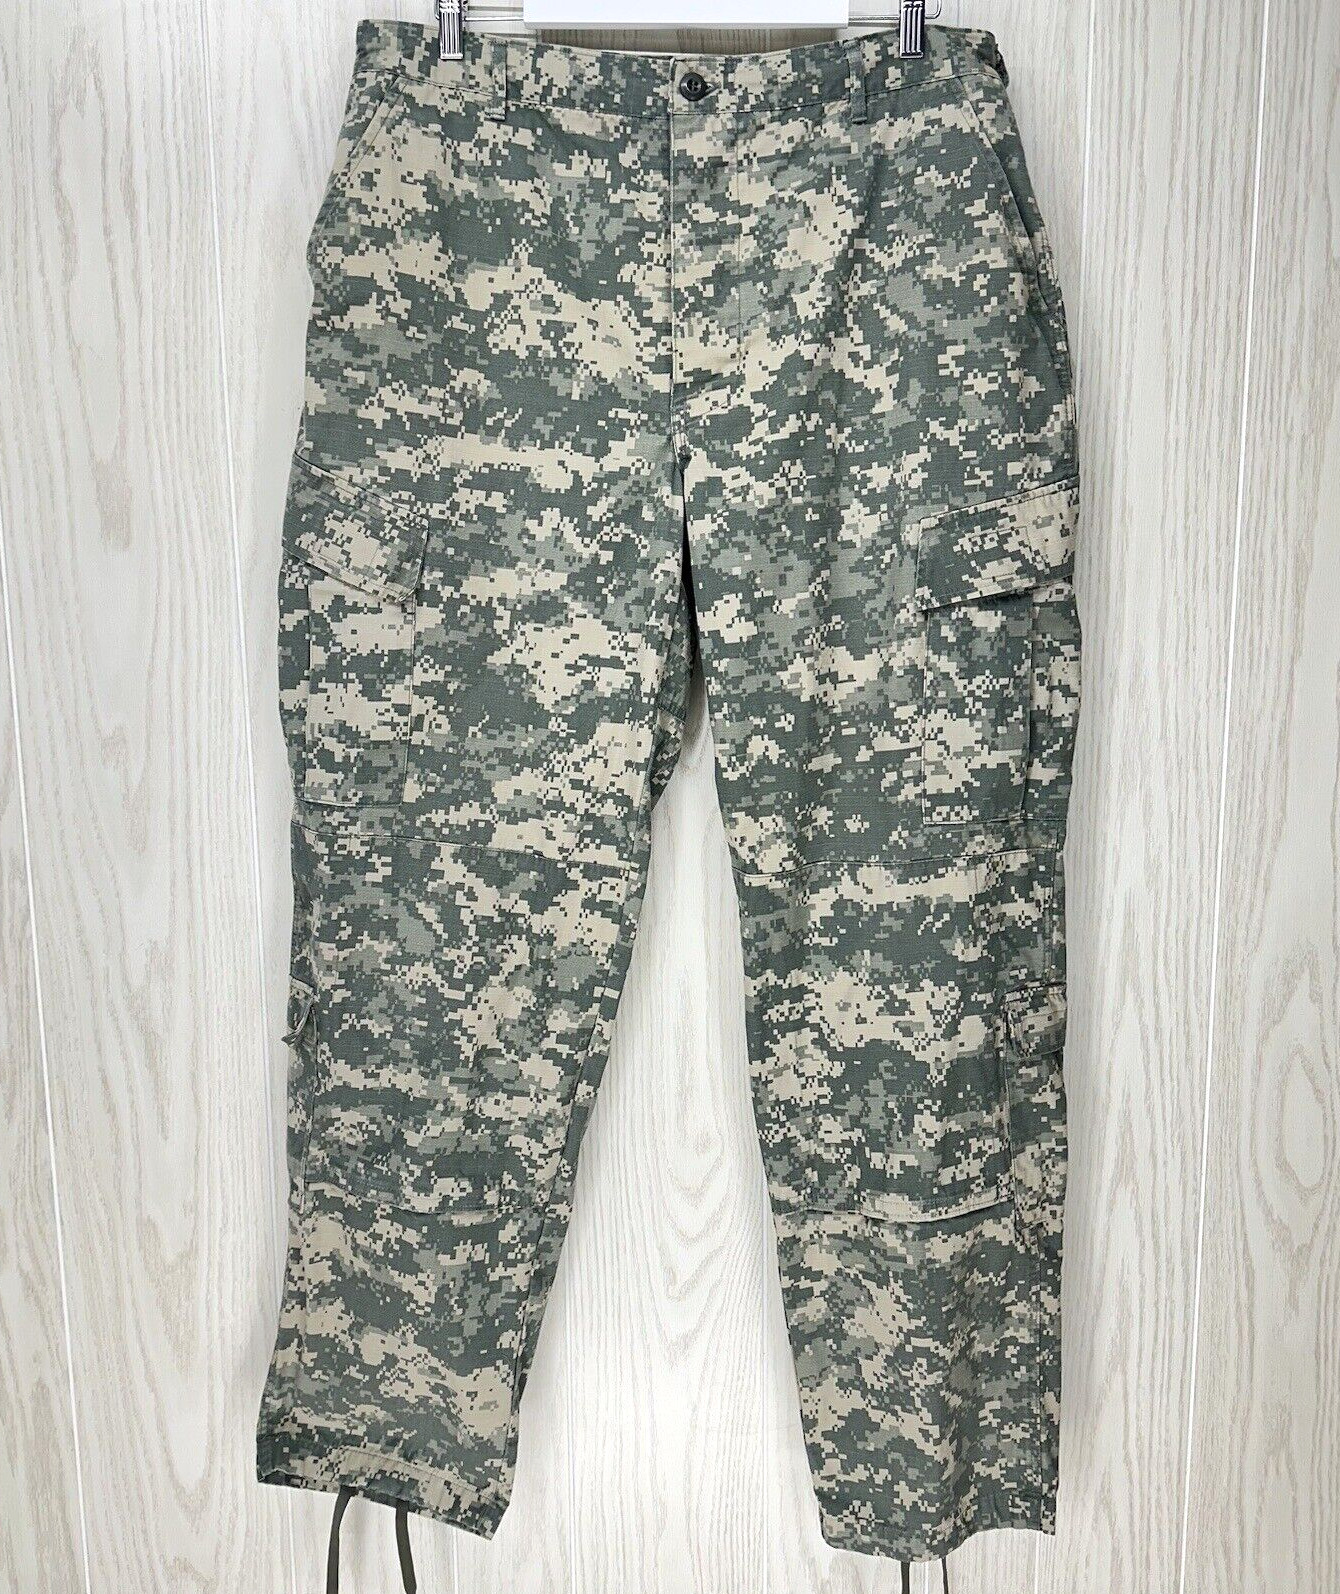 US Military Mens Camo Cargo Pants Size Large Long Digital Button Fly Seat Patch